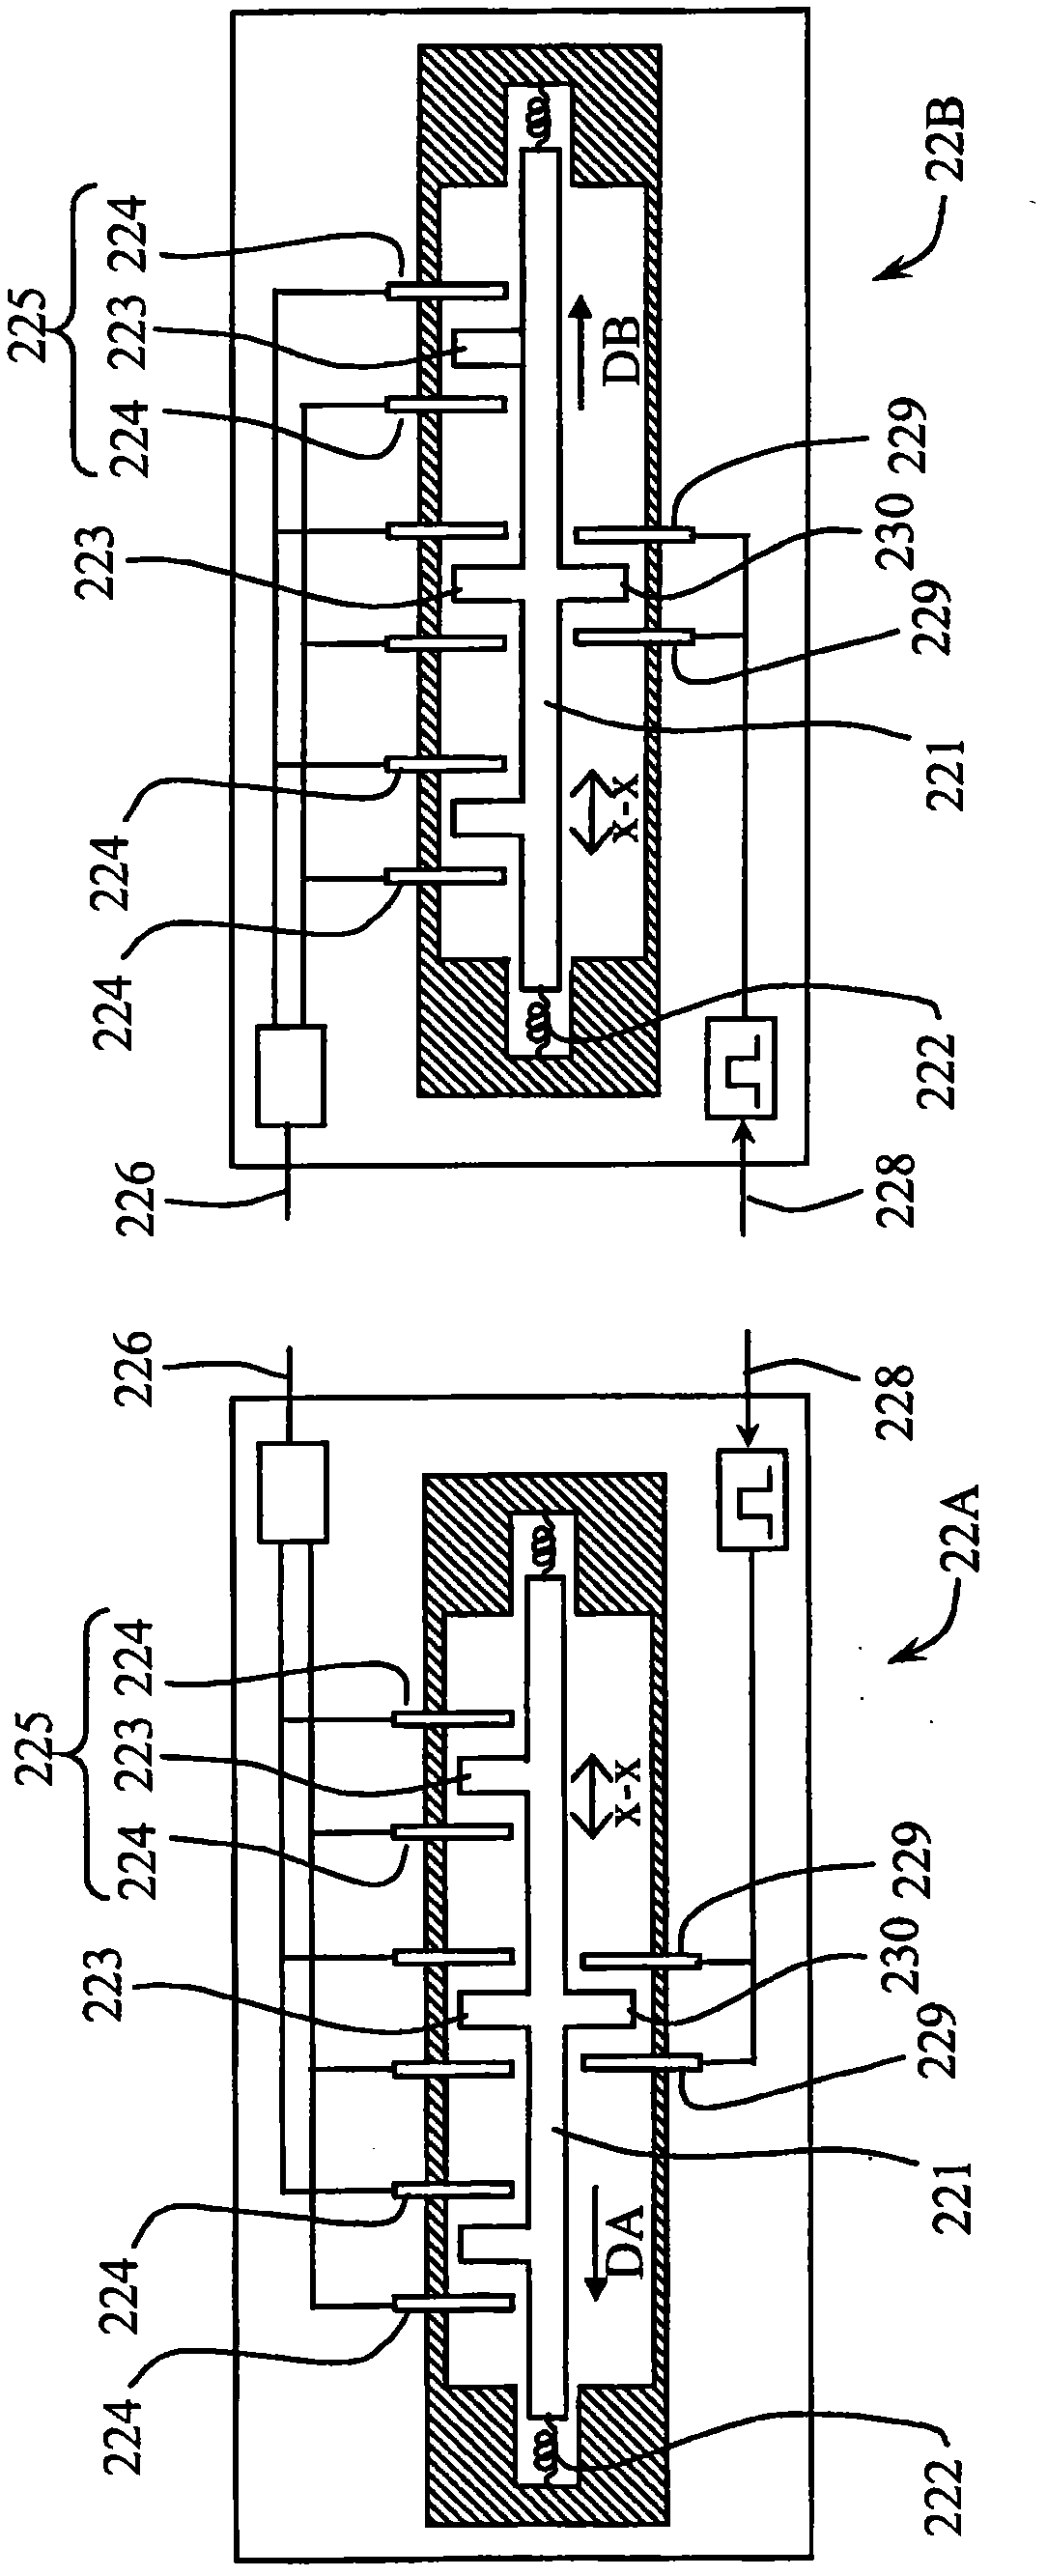 Distributed safety monitoring system provided with a safety loop and method of testing such a system